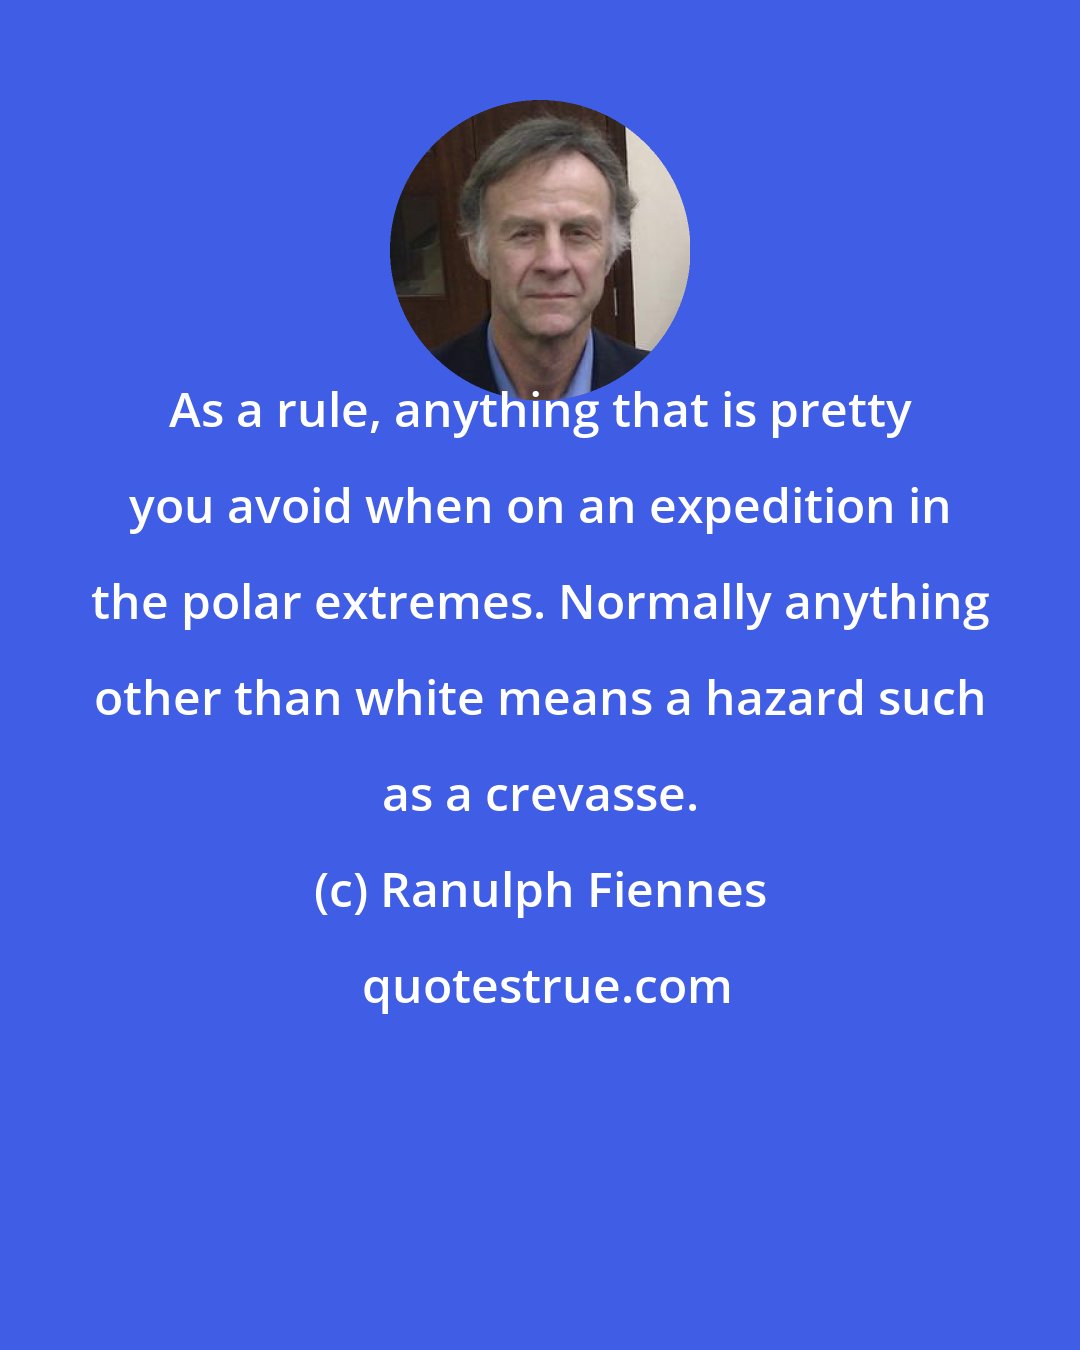 Ranulph Fiennes: As a rule, anything that is pretty you avoid when on an expedition in the polar extremes. Normally anything other than white means a hazard such as a crevasse.